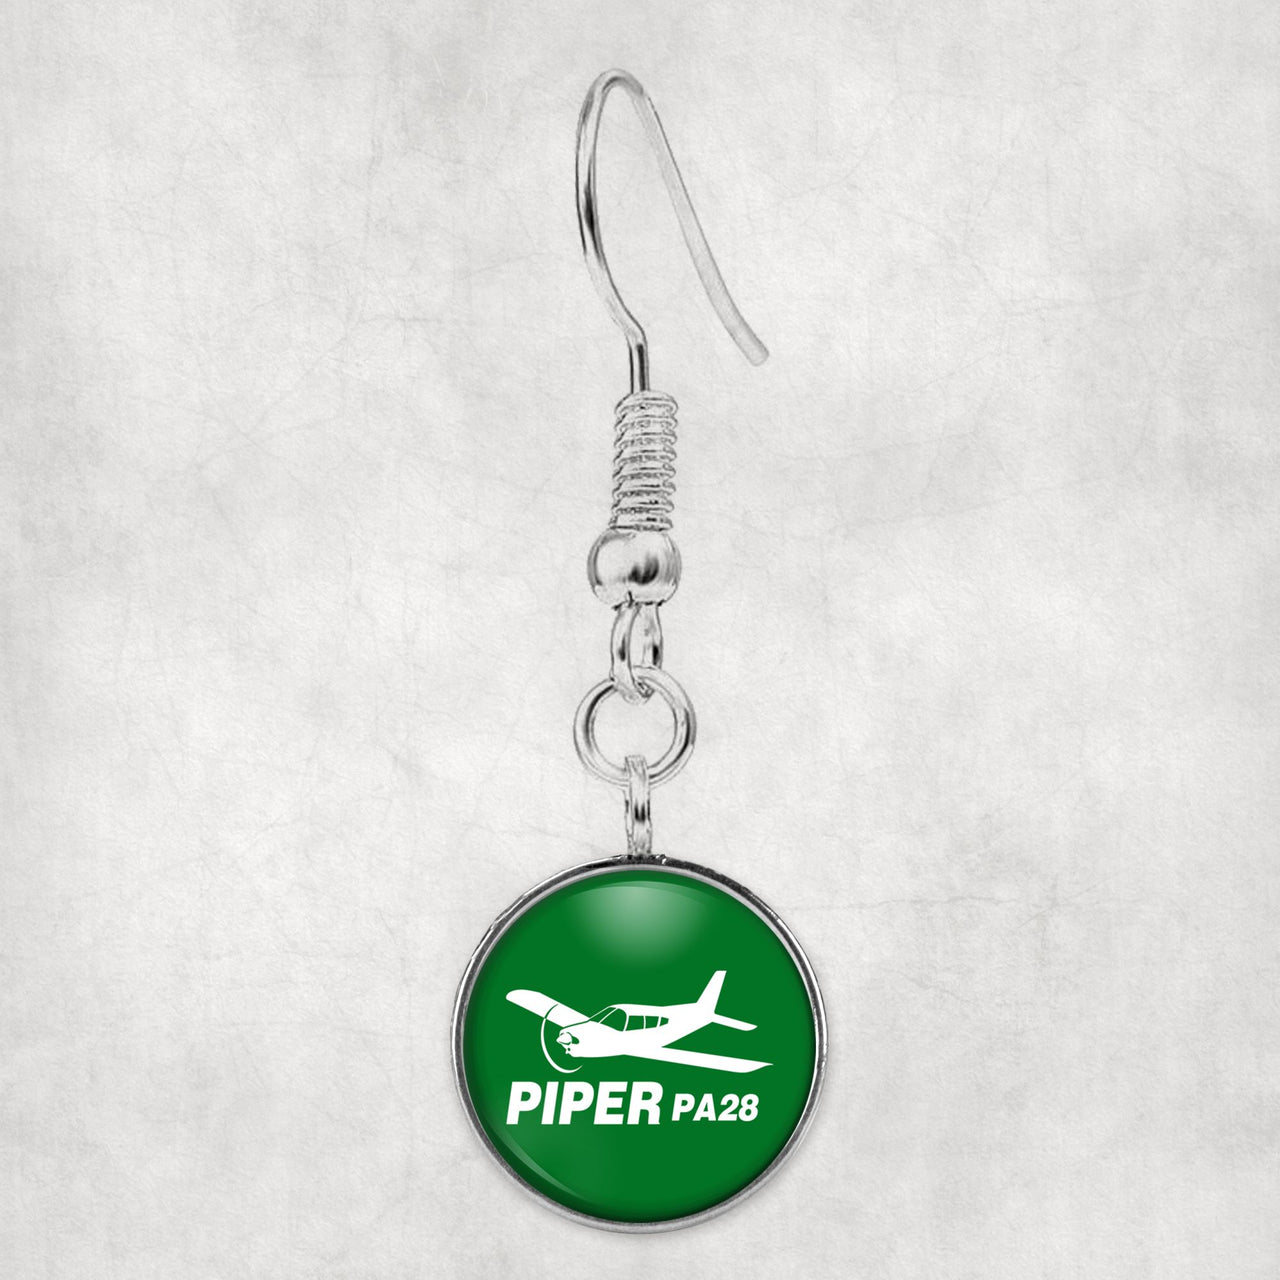 The Piper PA28 Designed Earrings